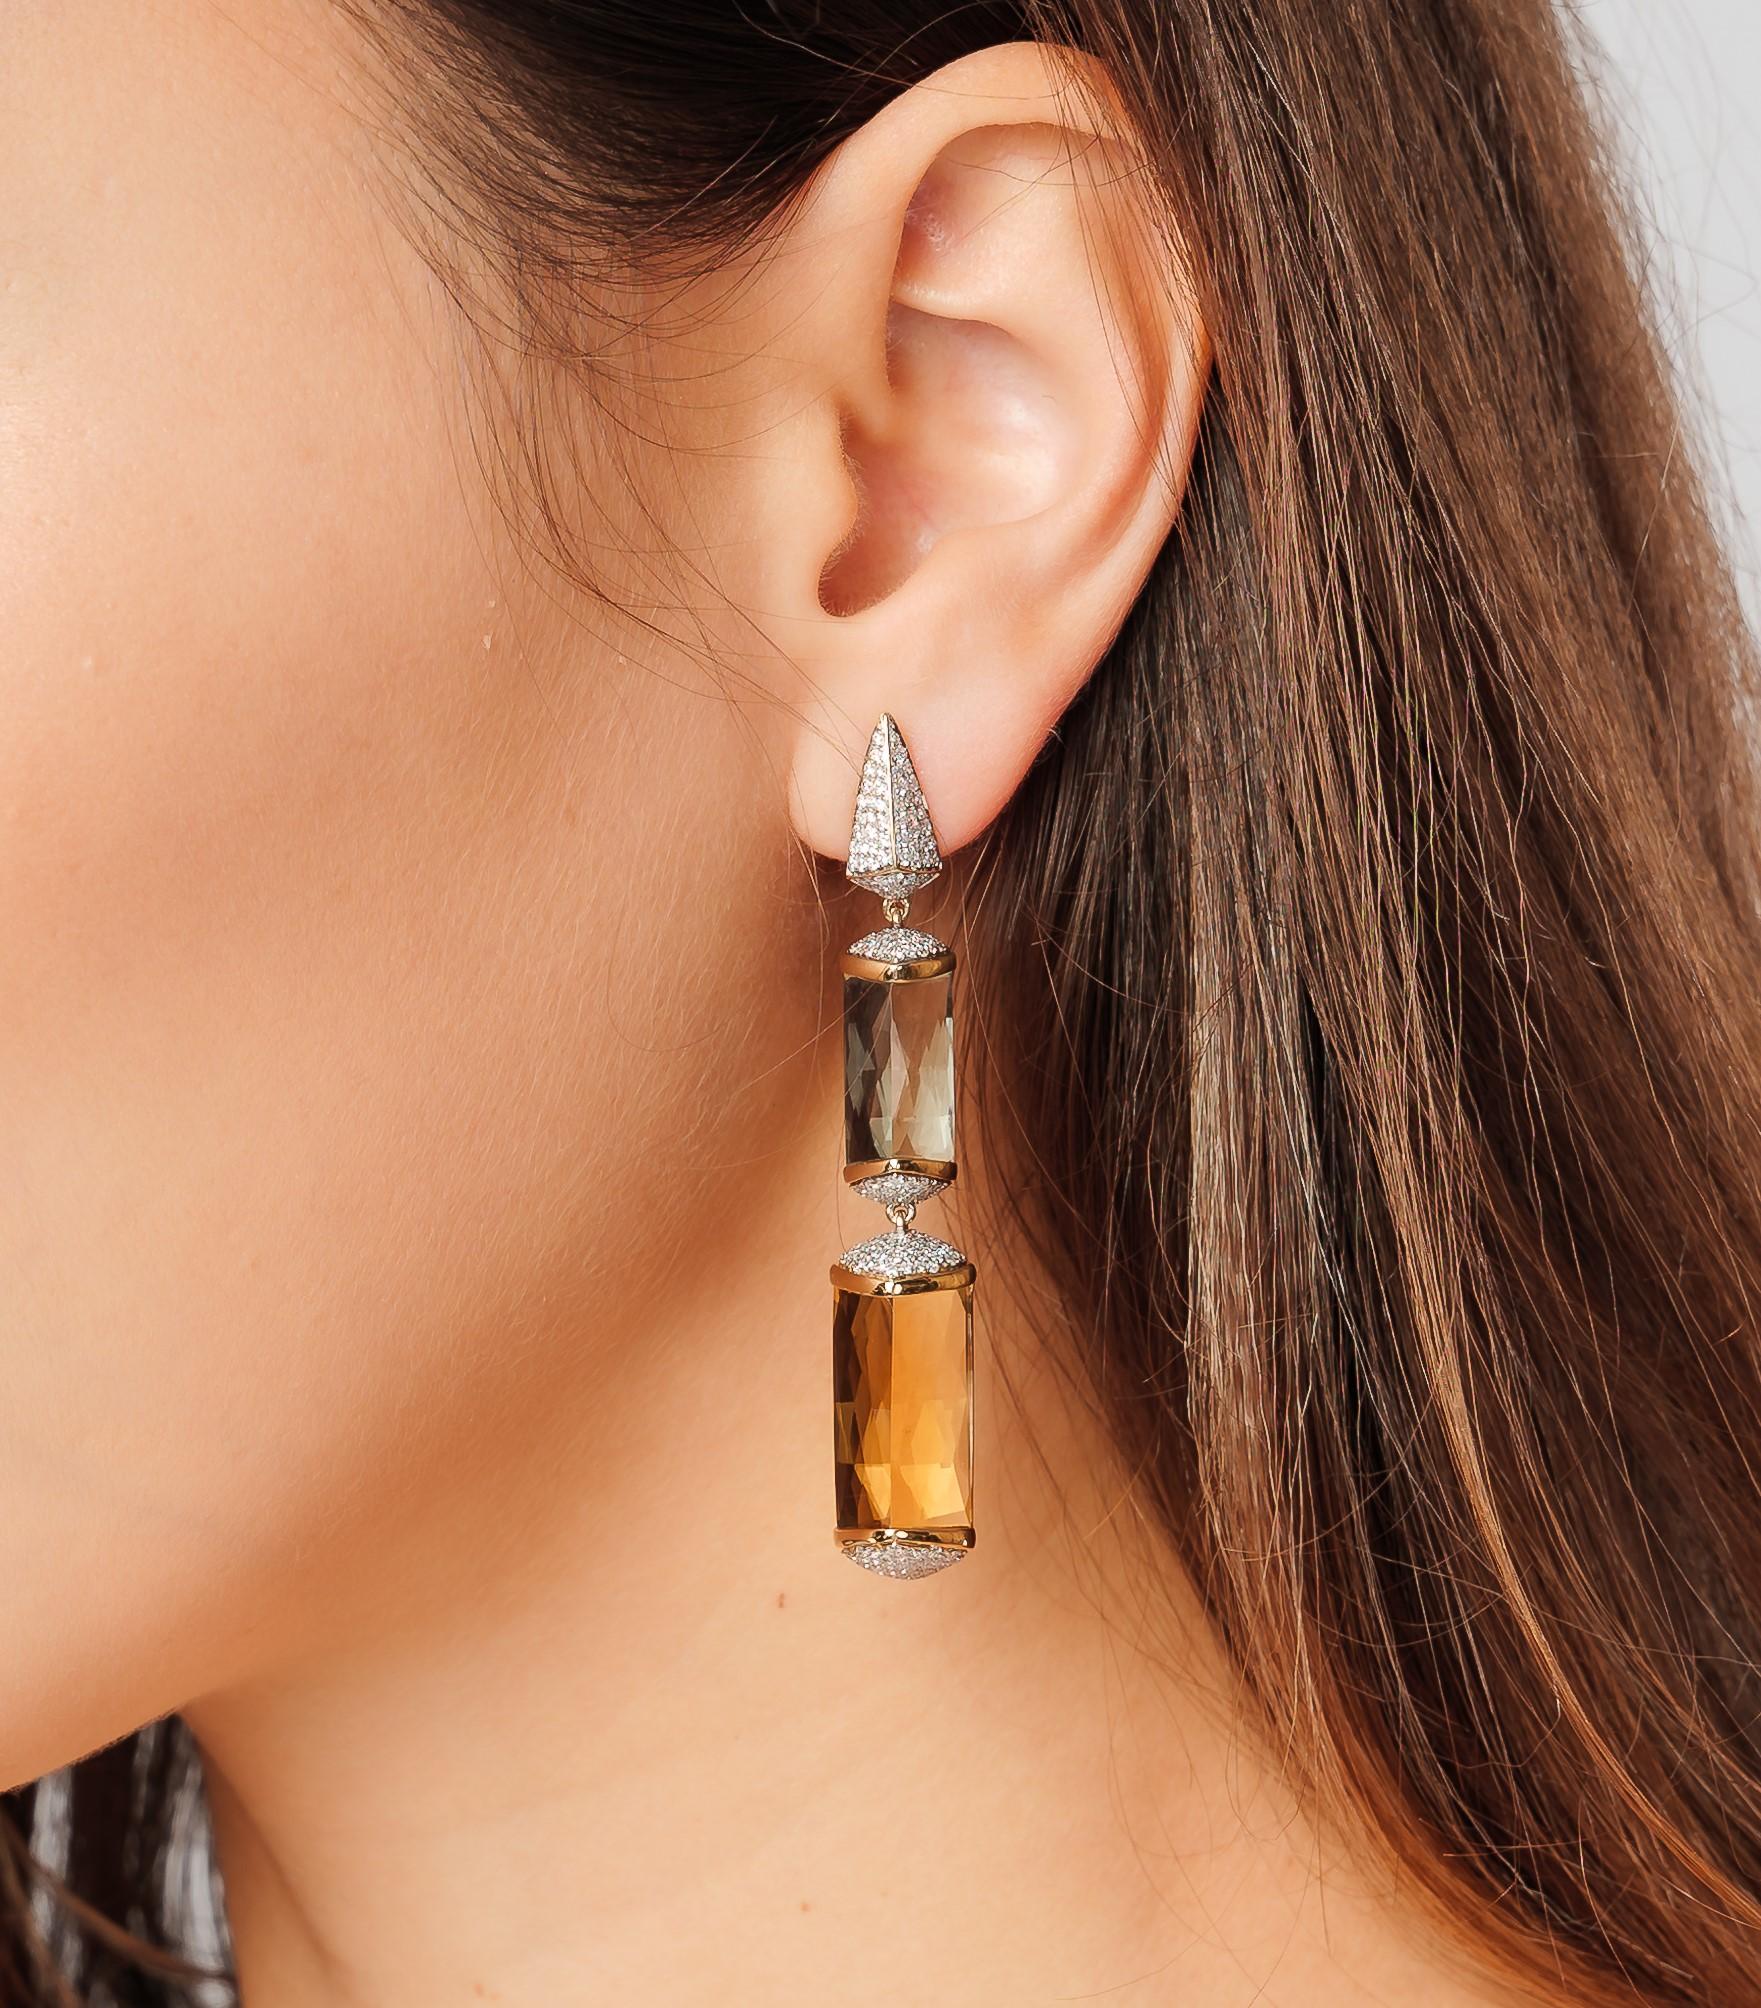 Happy Moods Collection -  this particular collection uses a vibrant variety of color gemstones to reflect the different feelings of happiness. Presenting our unique mismatch gemstone earrings perfect for warm sunny days featuring Honey Quartz and